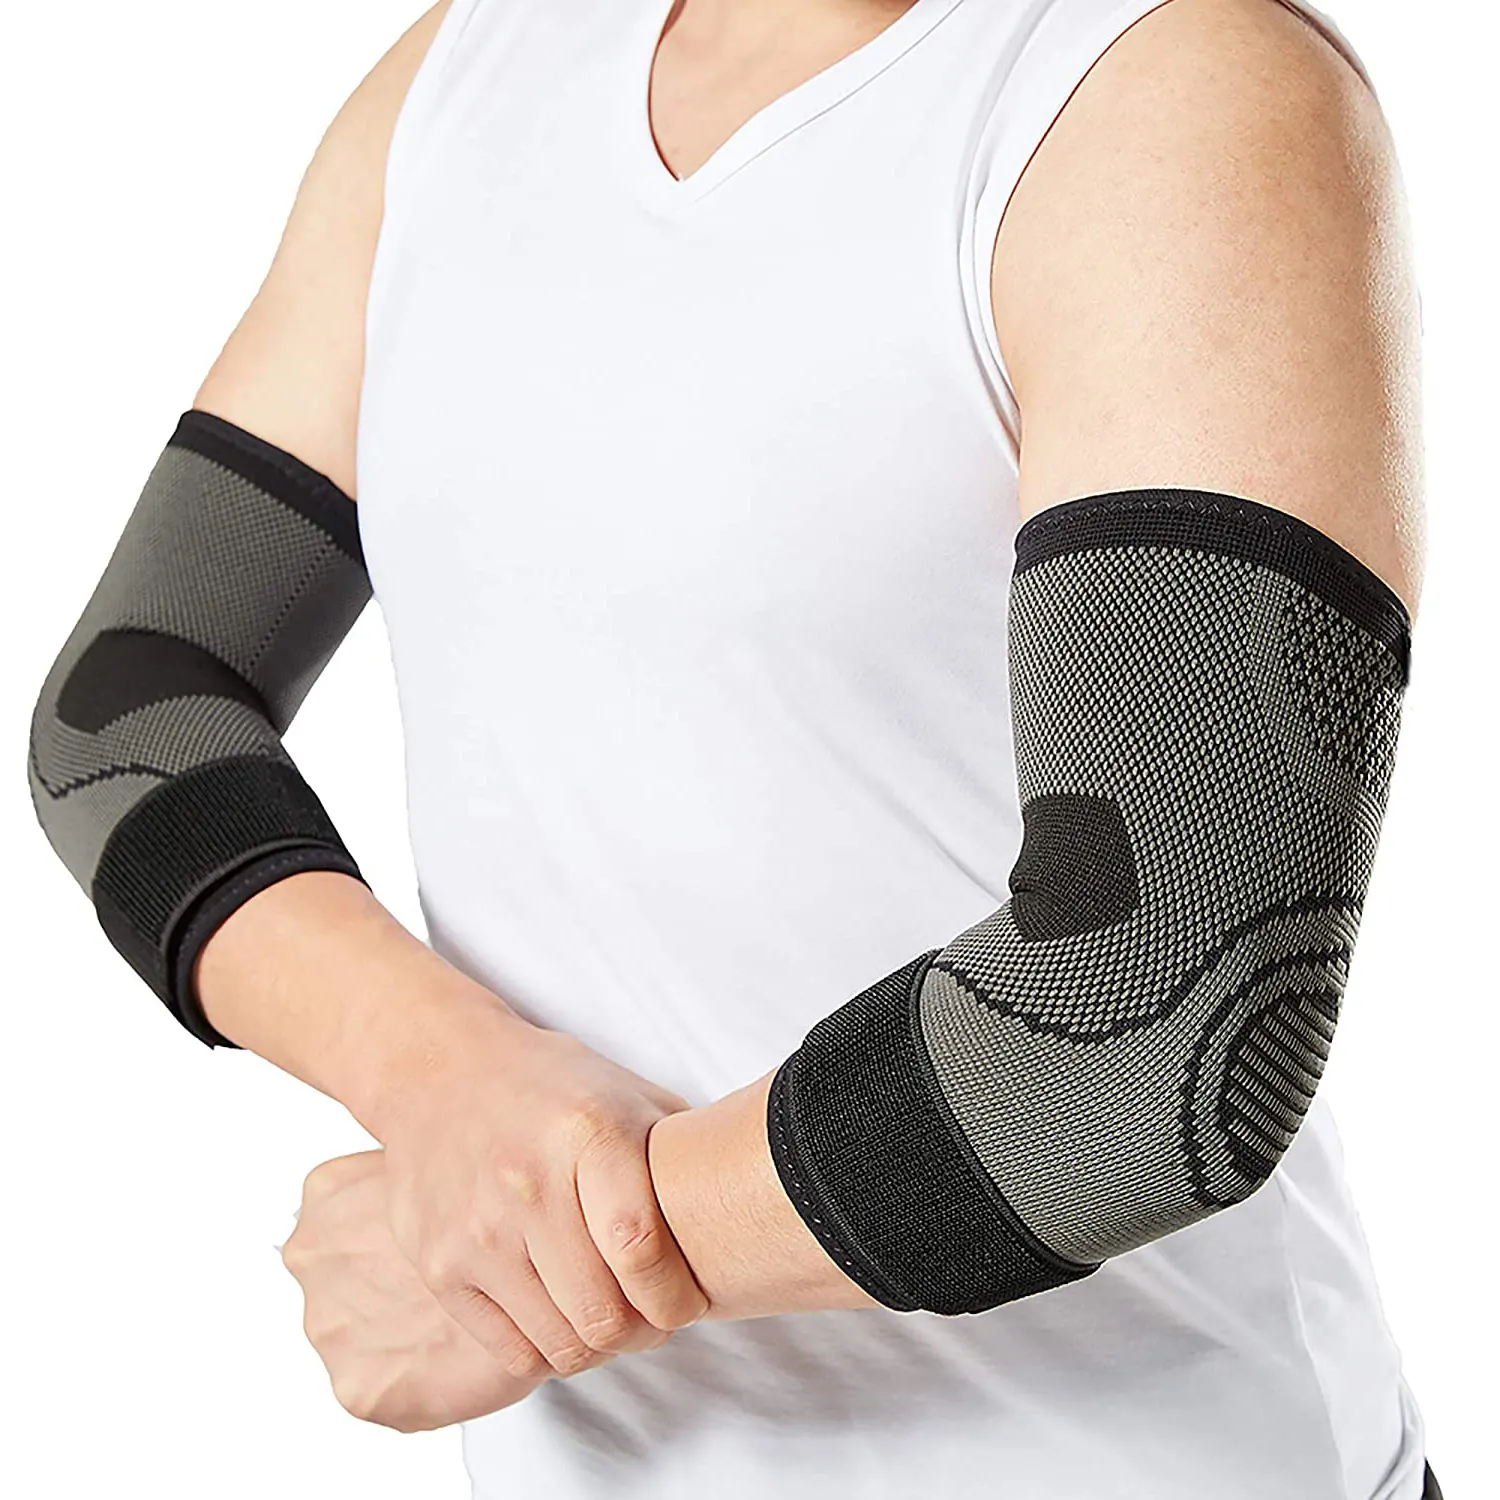 WM Safety Protective Elbow Brace Arm Compression Sleeve With Adjustable Strap